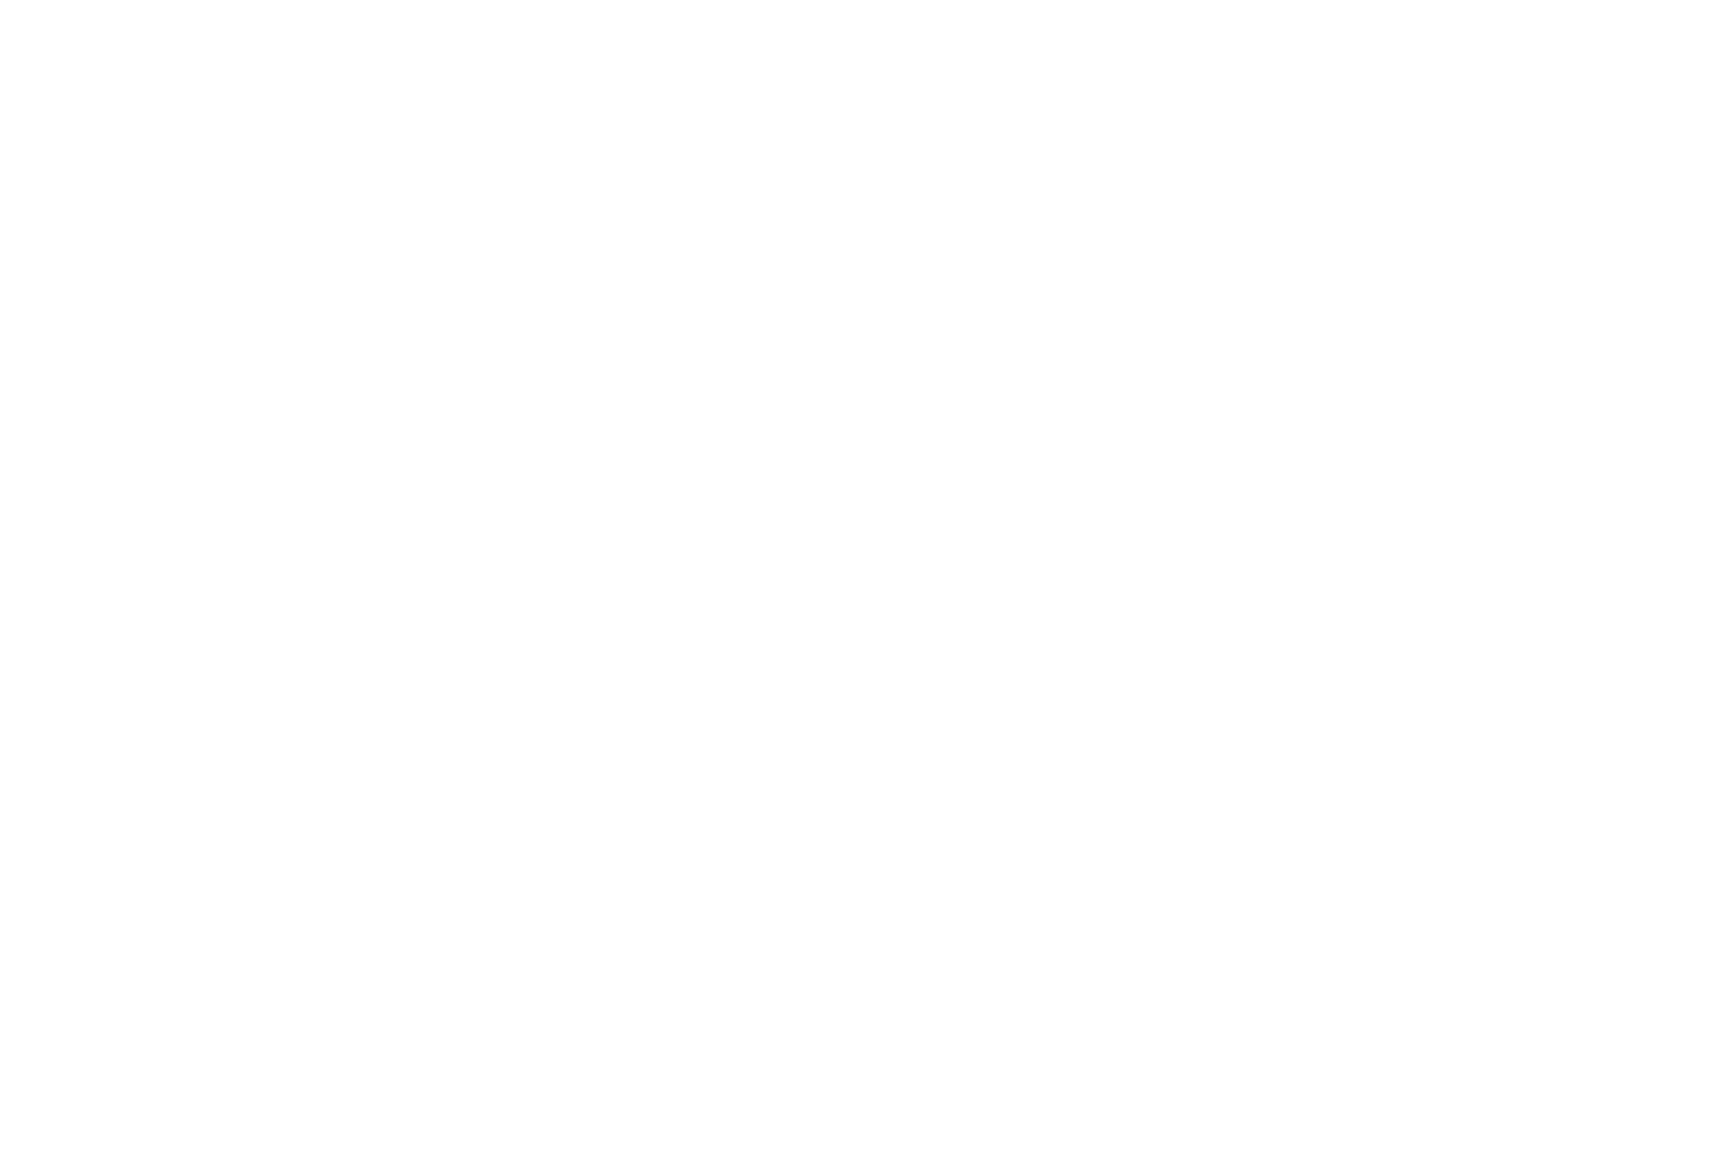 OFFICIAL SELECTION - Tenerife Film Festival - 2019.png